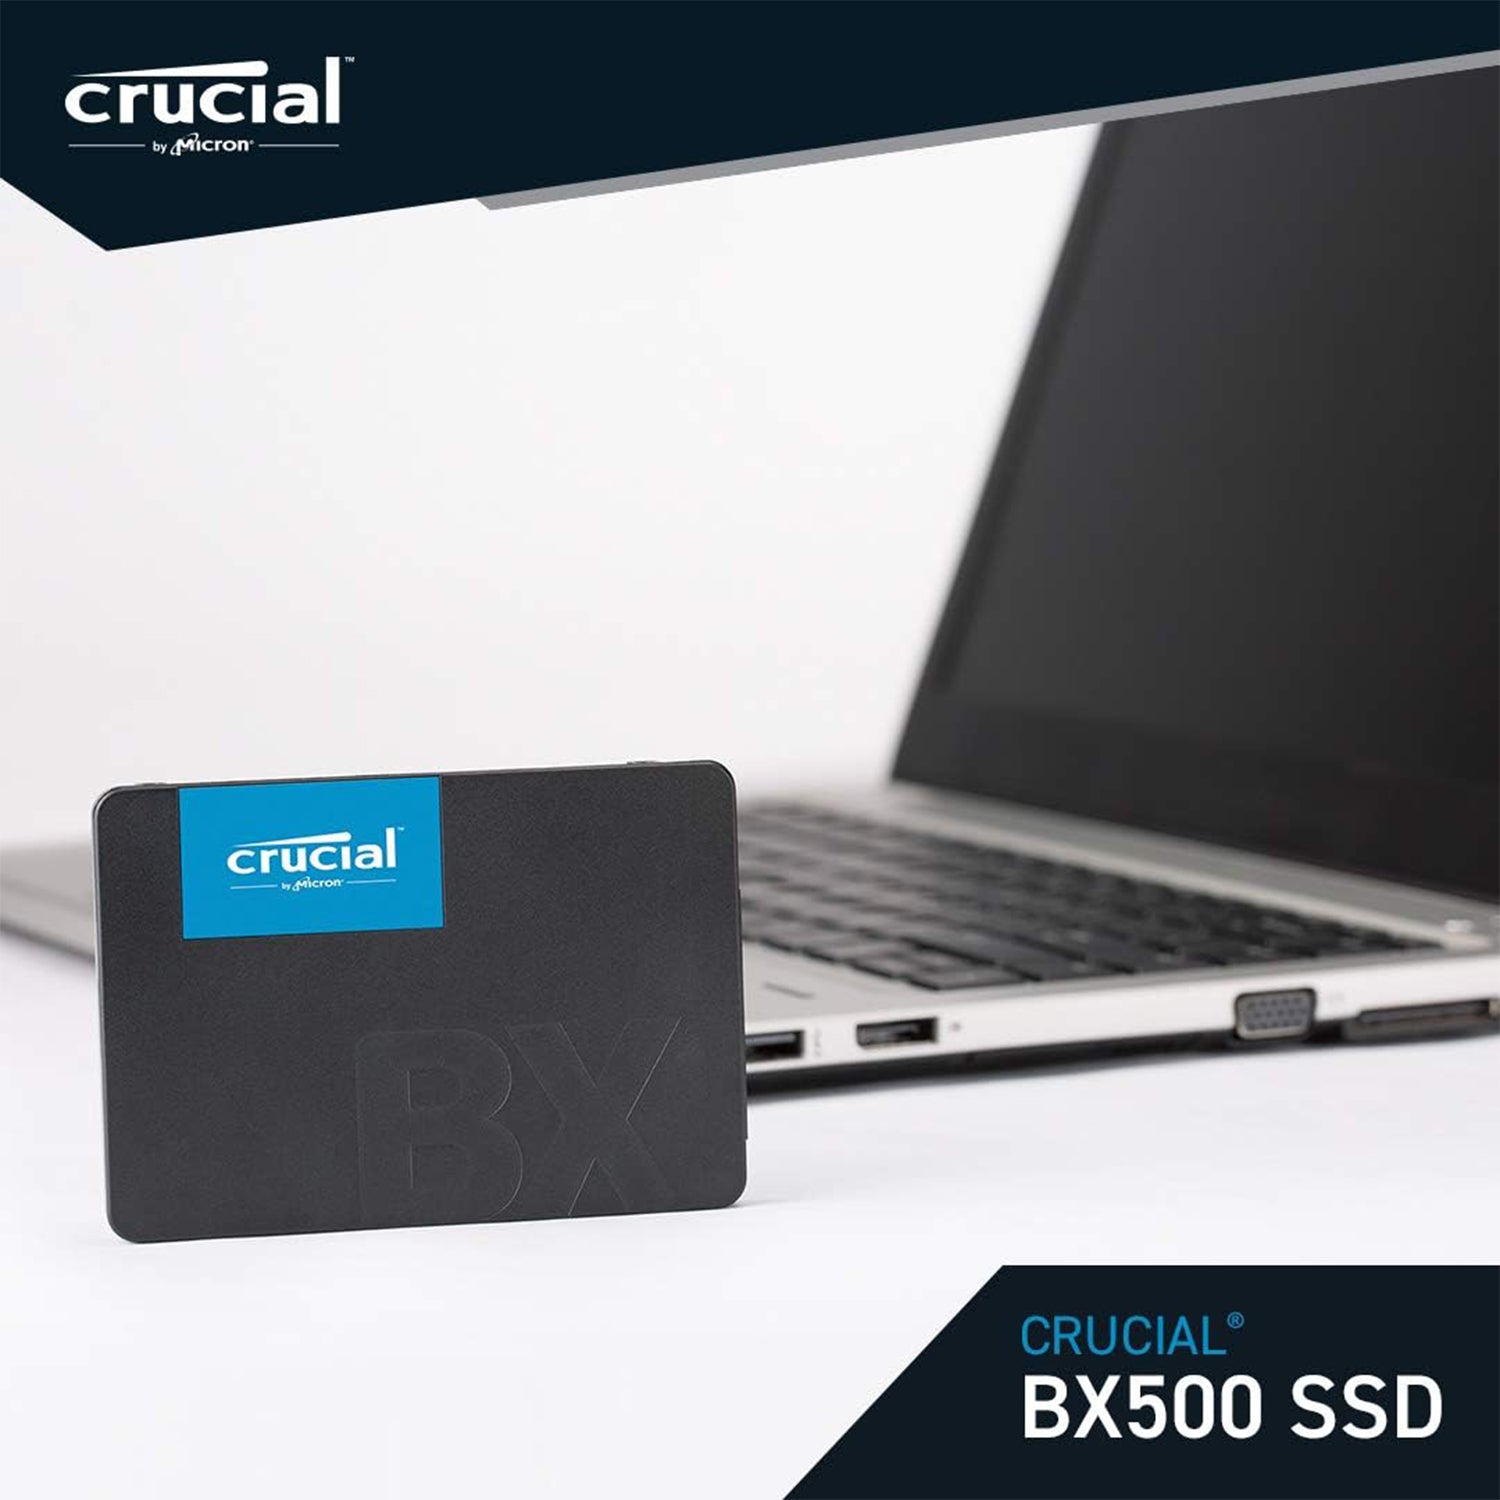 Crucial BX500 2TB SSD | 3D NAND SATA Interface | 2.5 inch Form Factor | up to 540 MB/s read for Laptop or Desktop PC - (CT2000BX500SSD1)